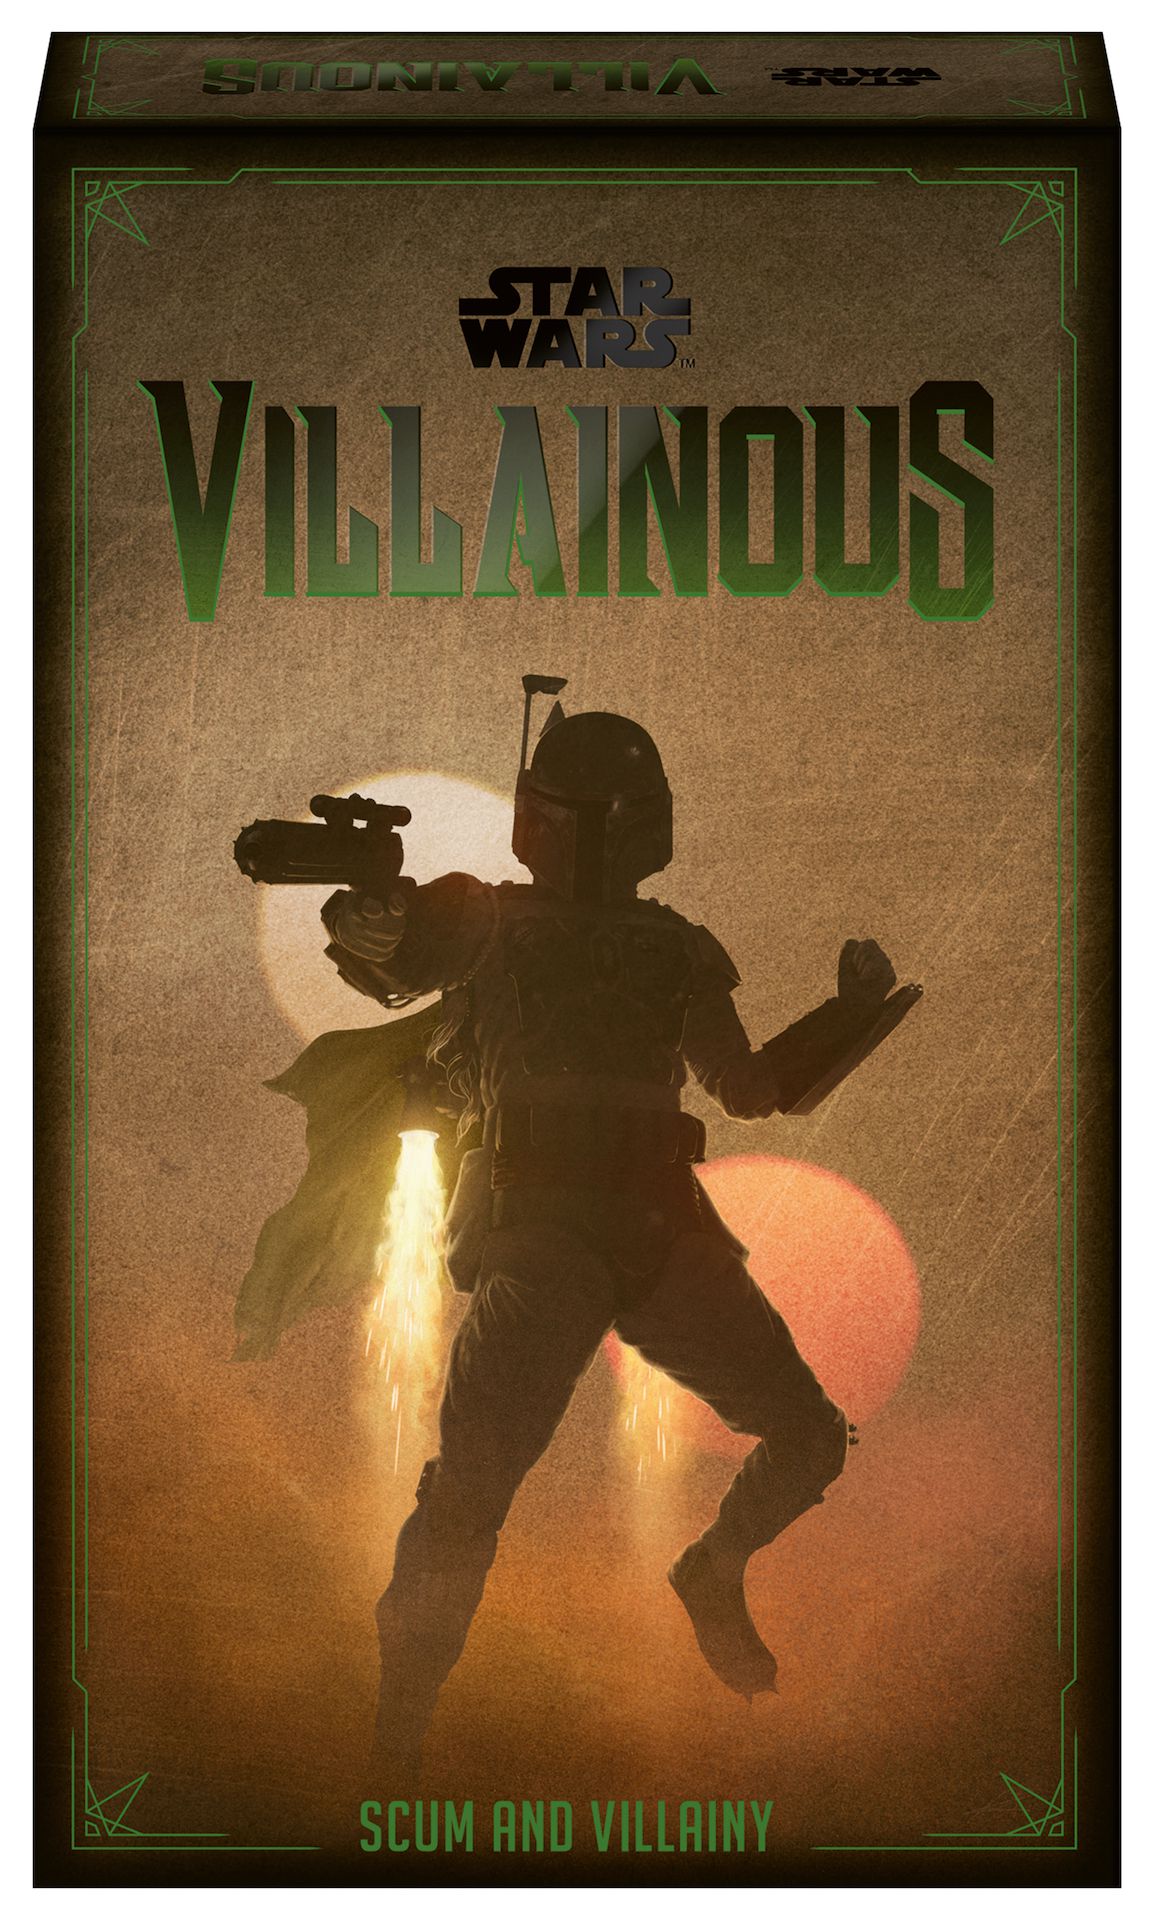 A silhouette of Boba Fett in flight, pointing his laser carbine, from an early render of the Star Wars Villainous: Scum and Villainy box. The text is green, and the twin suns of Tatooine make up the background.